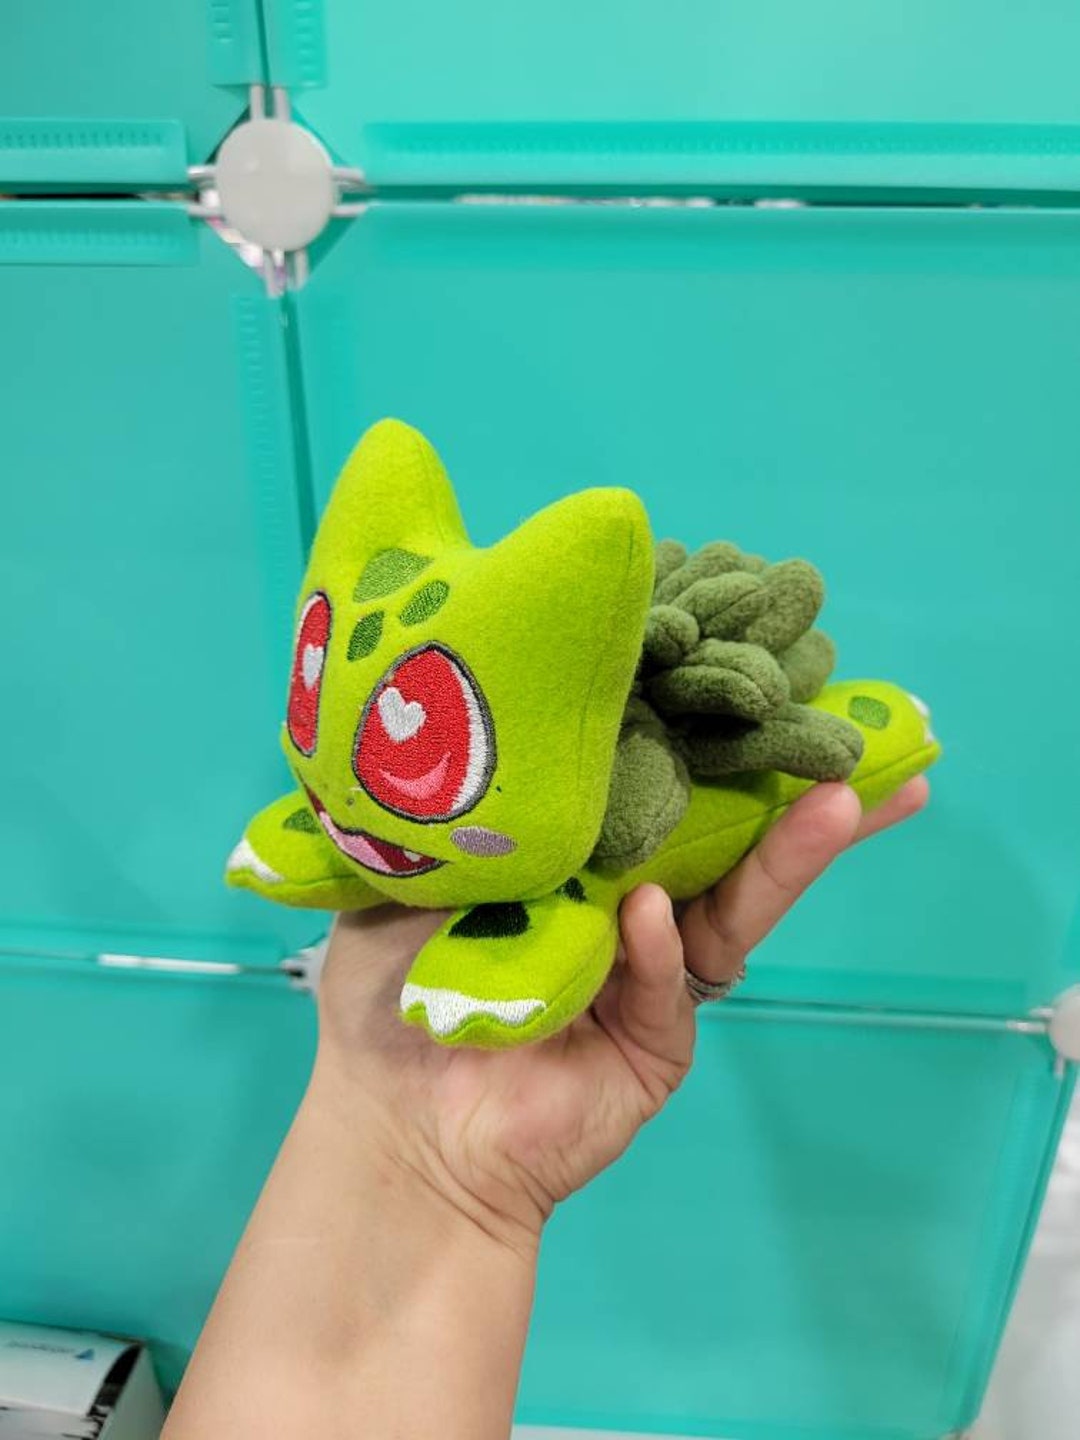 Succulent Plant Pocket Monster Plushie With Heart Eyes Made and